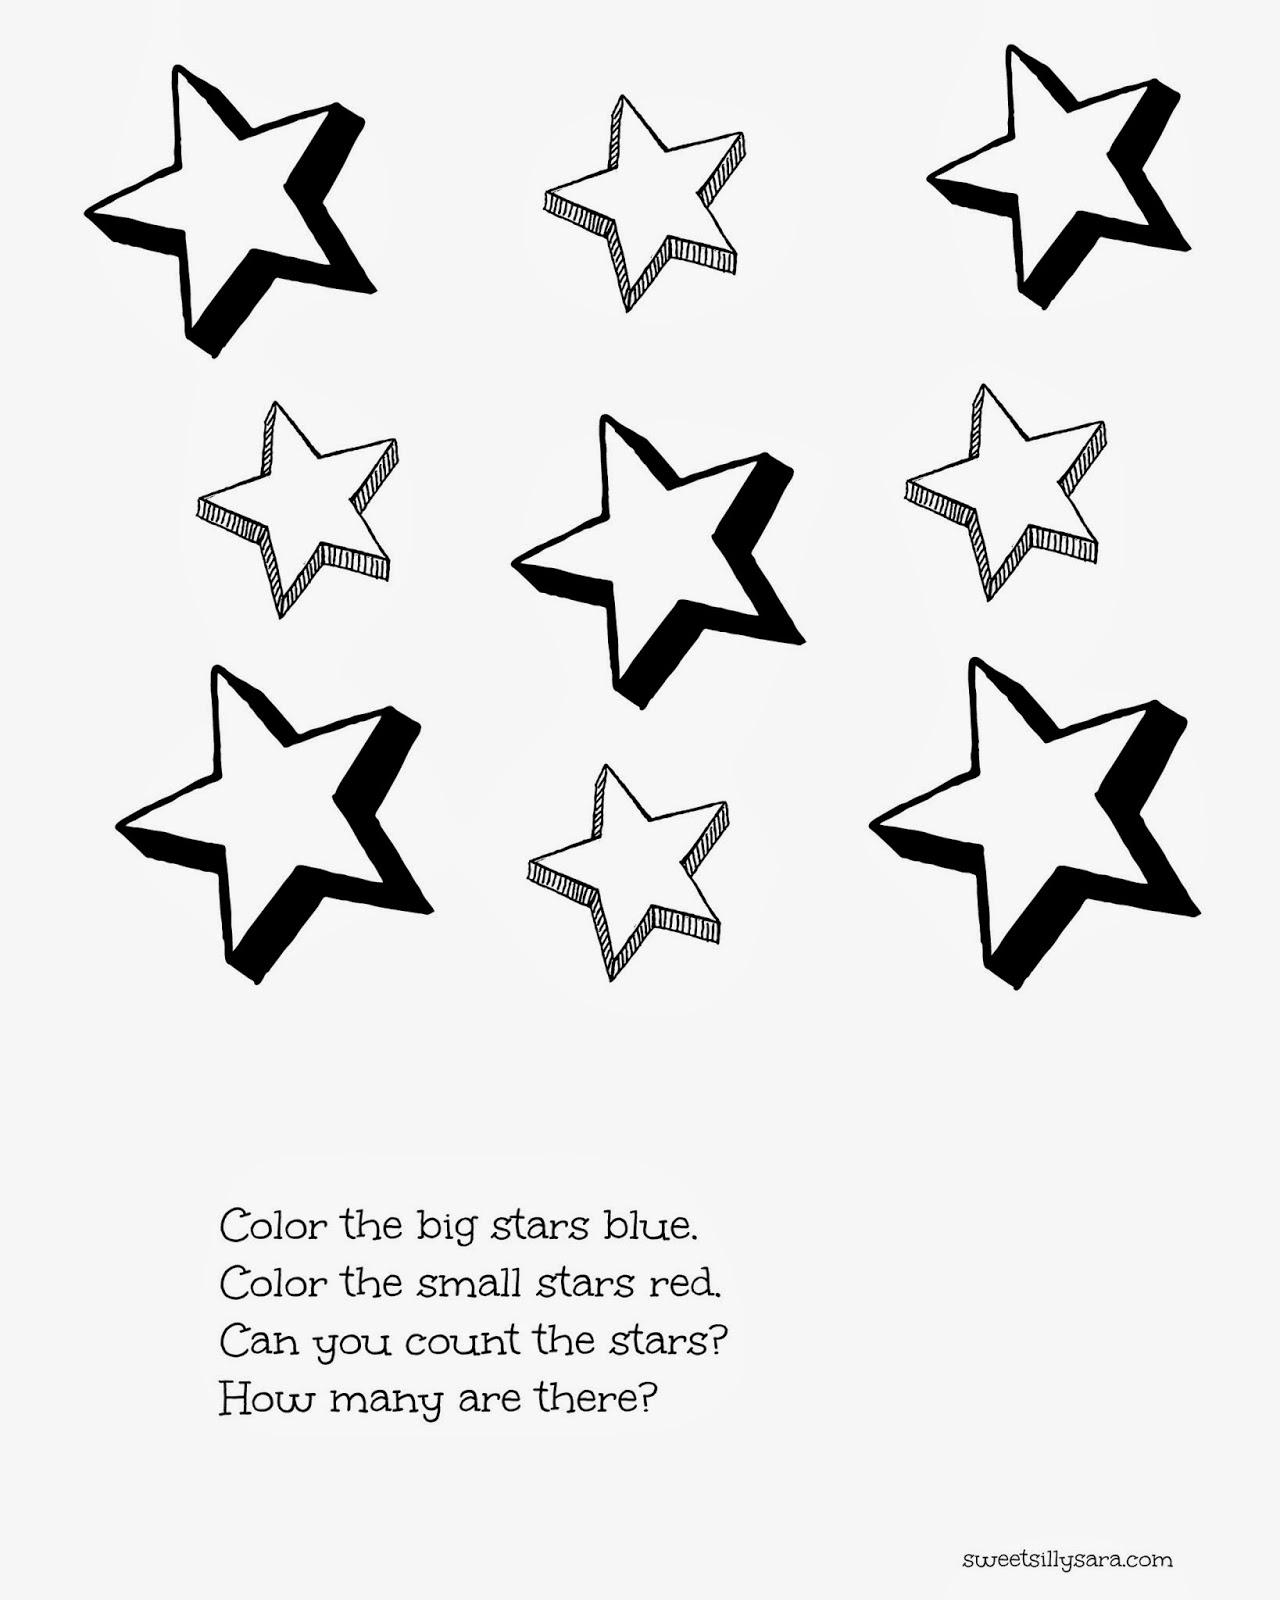 10-best-images-of-counting-stars-worksheet-number-the-stars-printable-worksheets-star-math